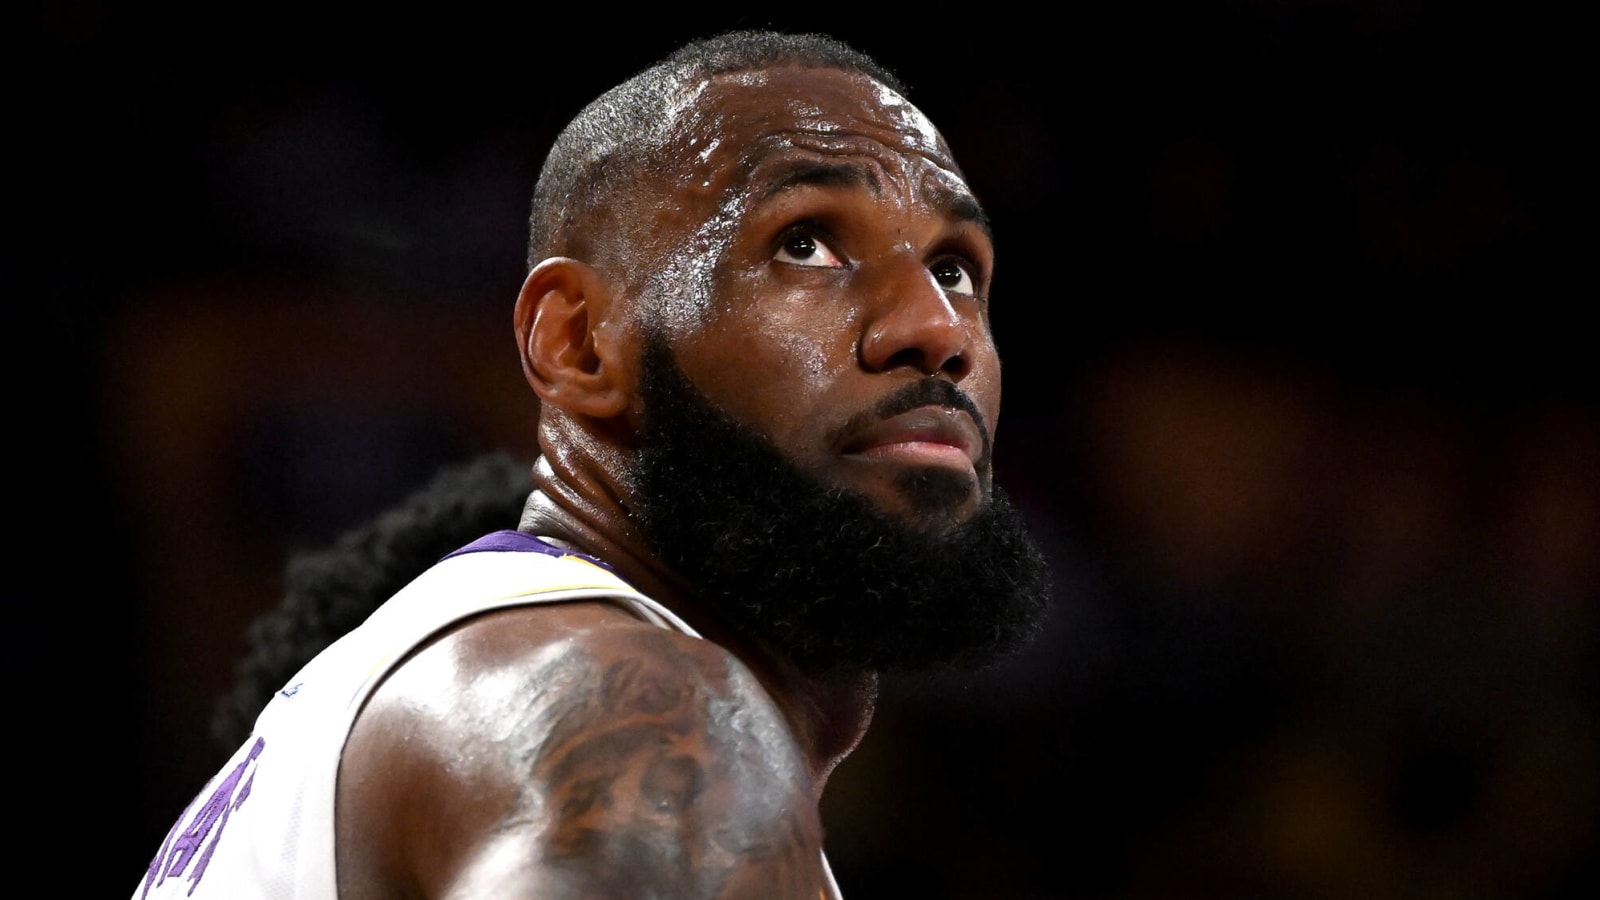 LeBron James leaves floor early during Lakers’ blowout loss